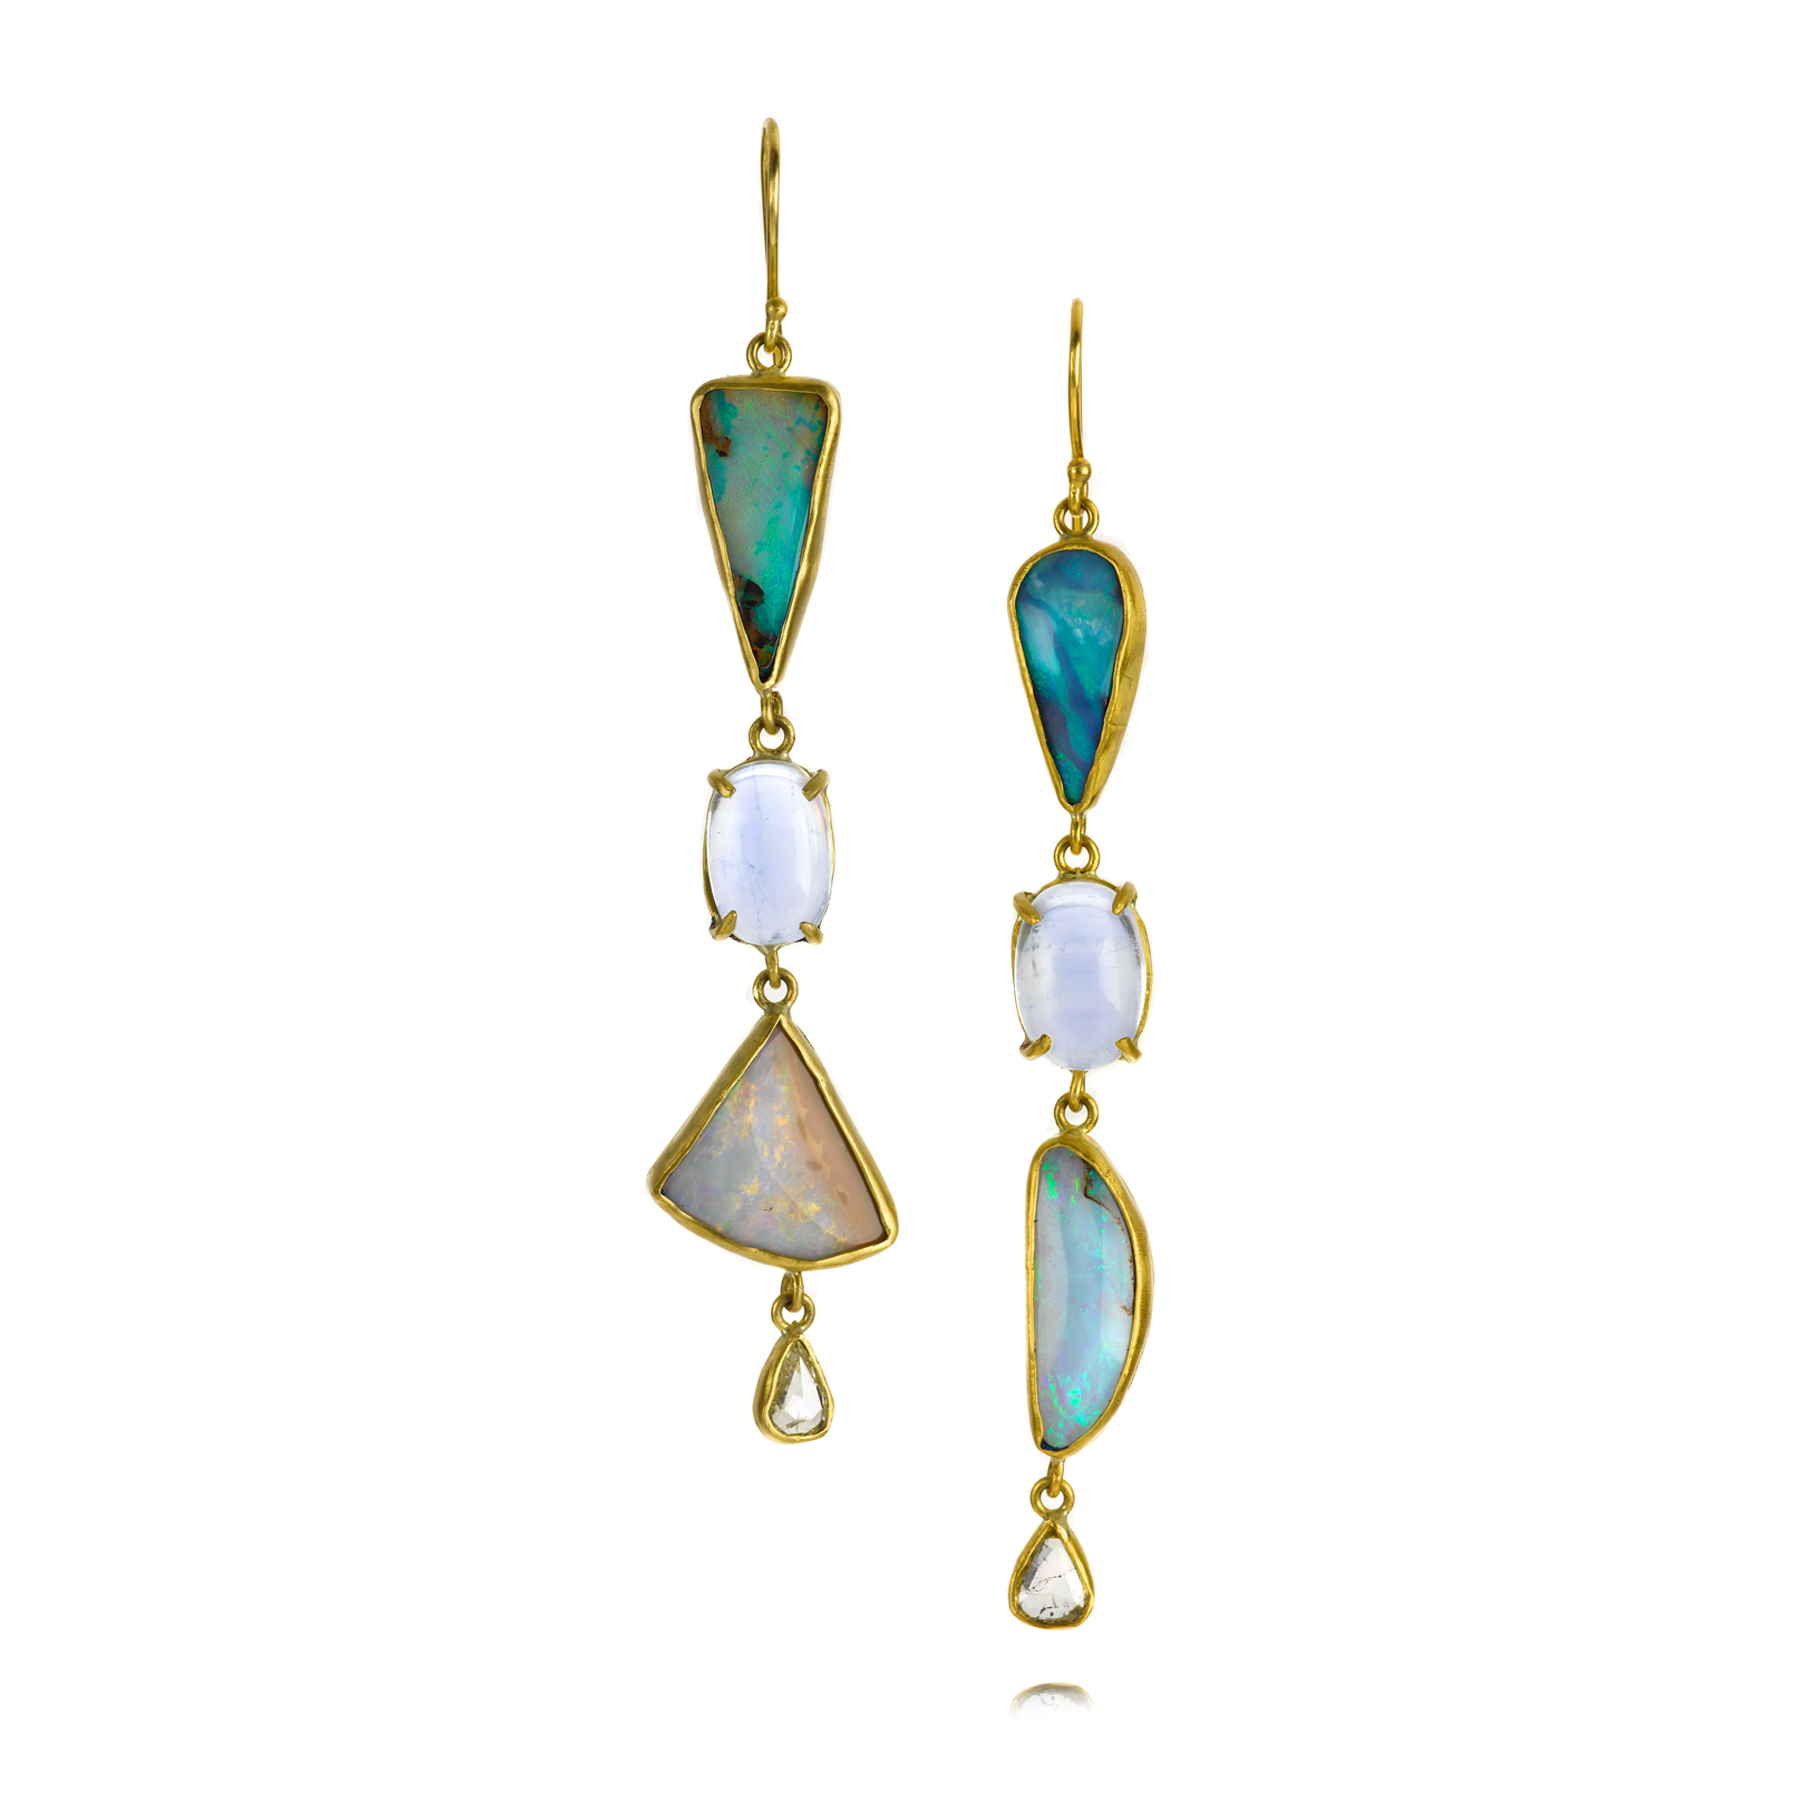  Margery's favorite pair she's made this year: in 22K gold featuring Boulder opal, moonstone and rose cut diamonds. 